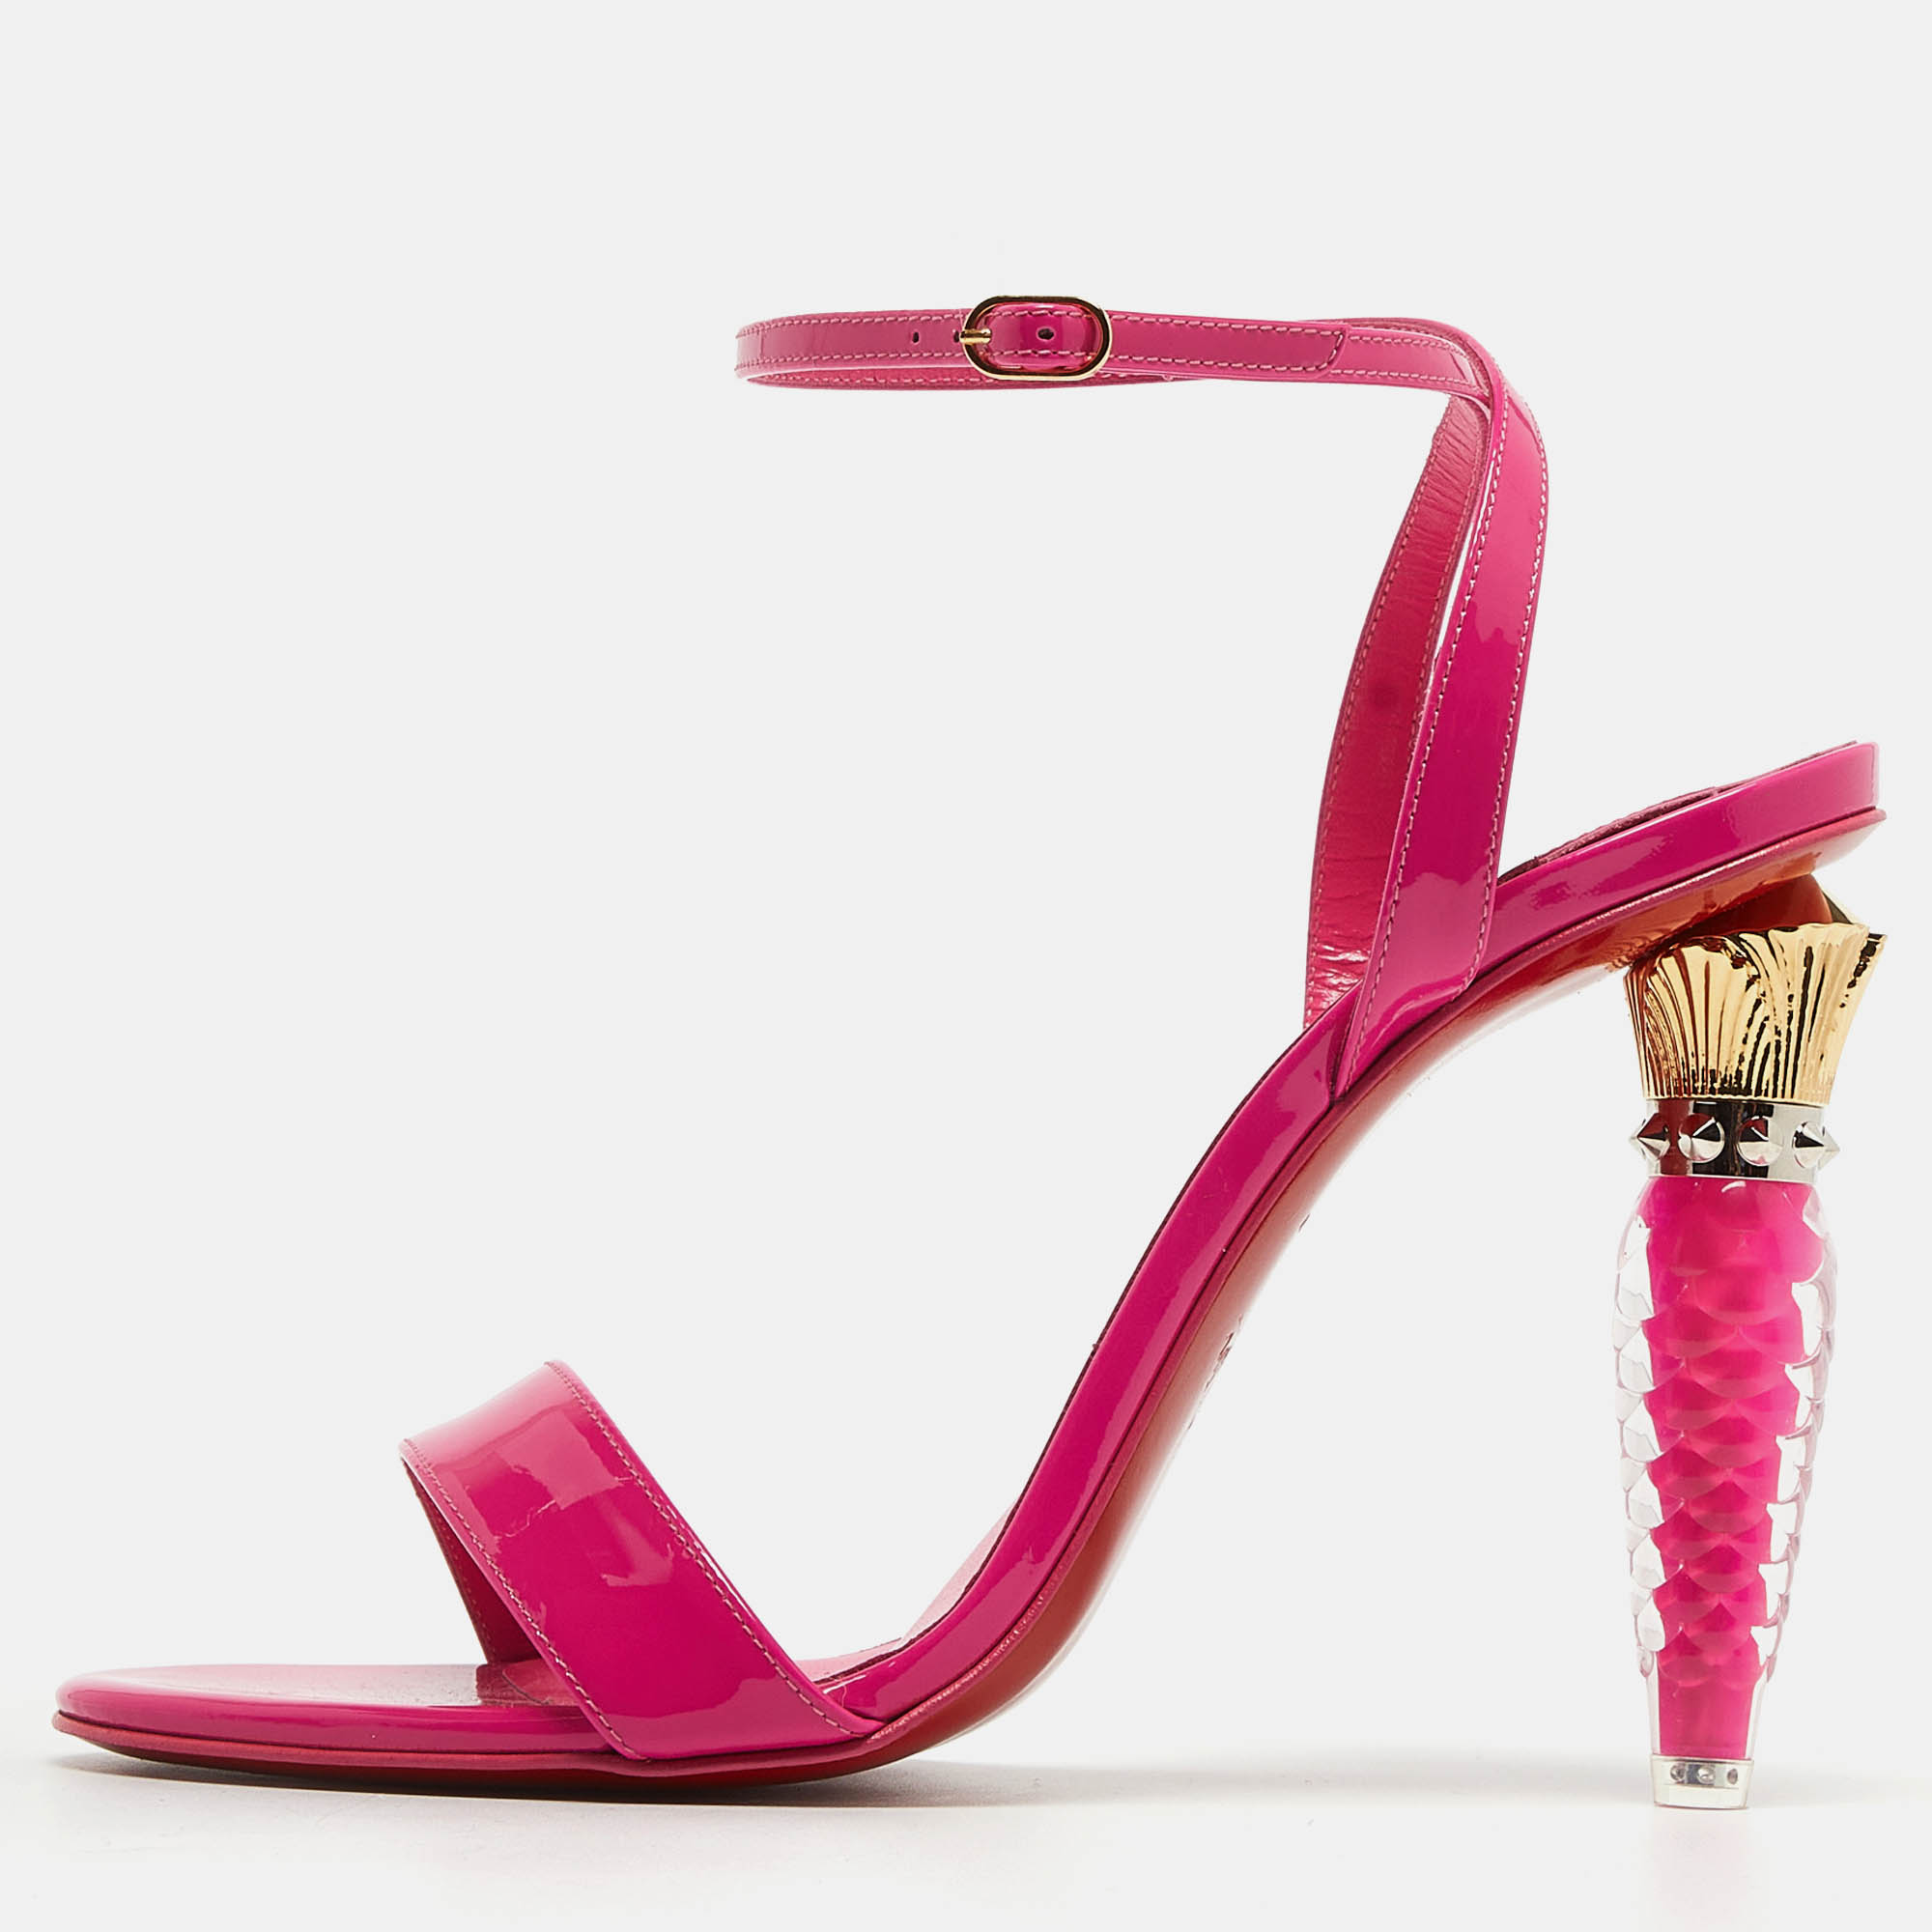 Christian louboutin pink patent lipgloss ankle strap sandals size 39